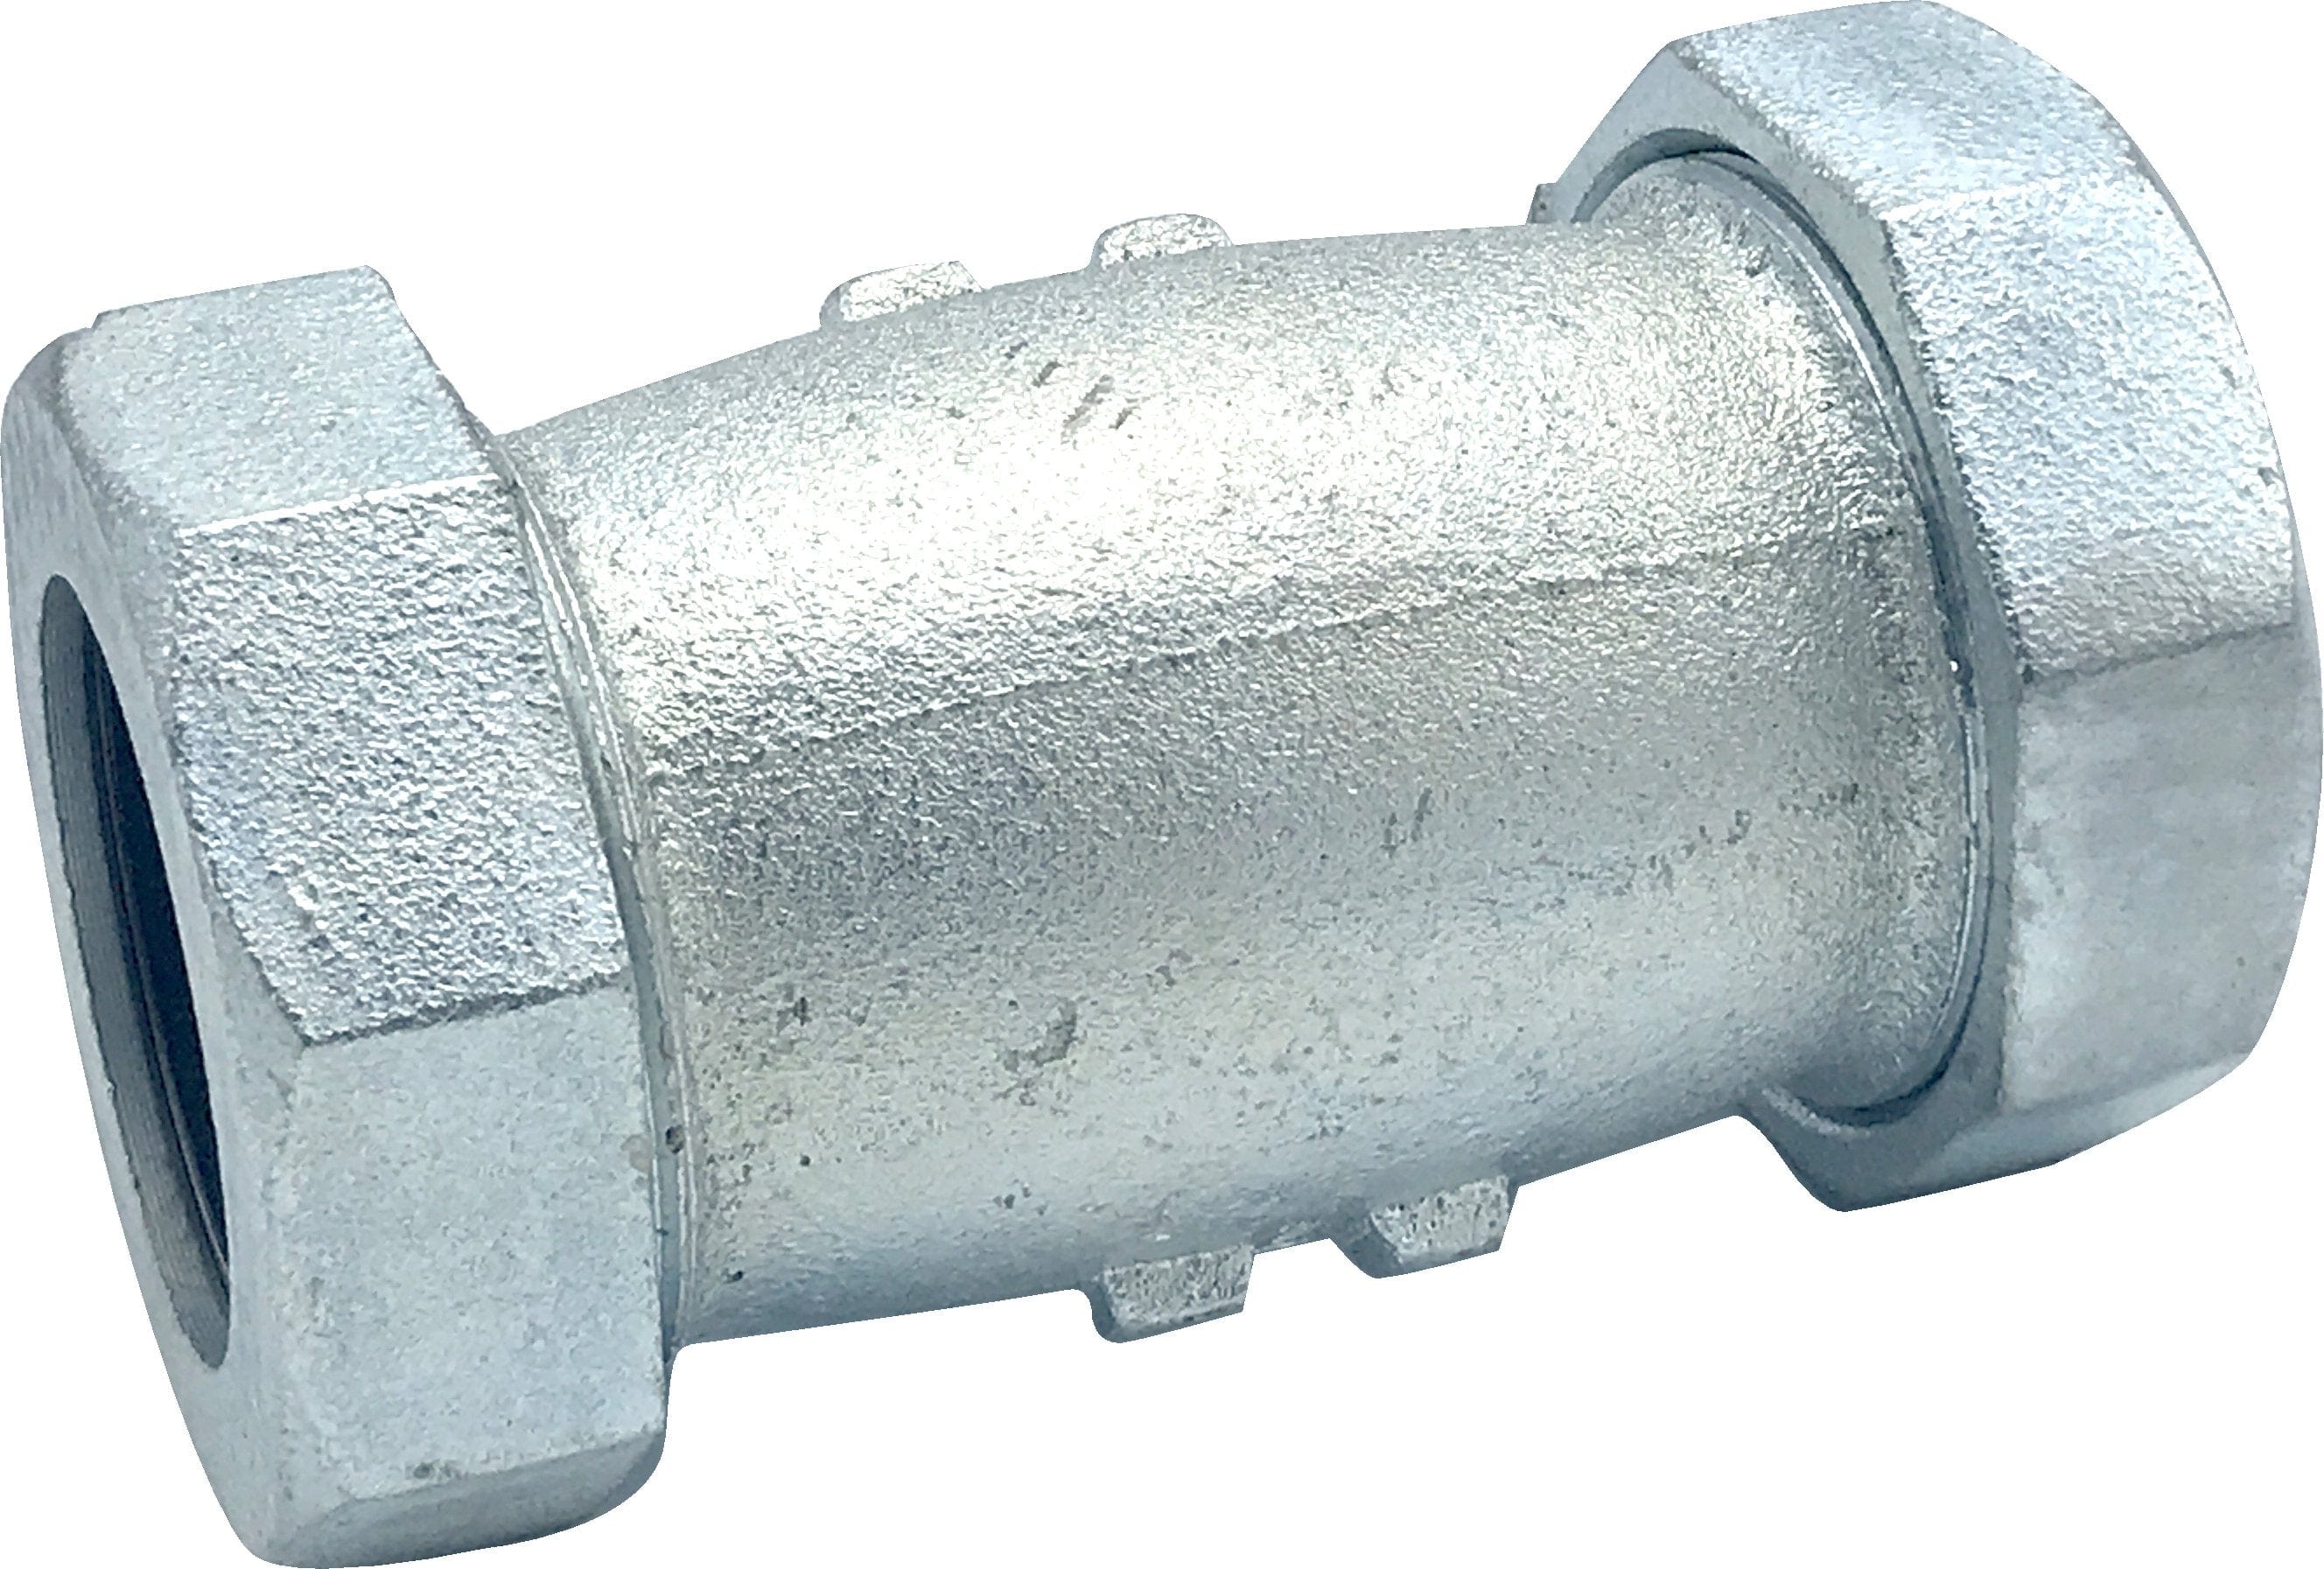 1/2" Long Galvanized Compression Coupling